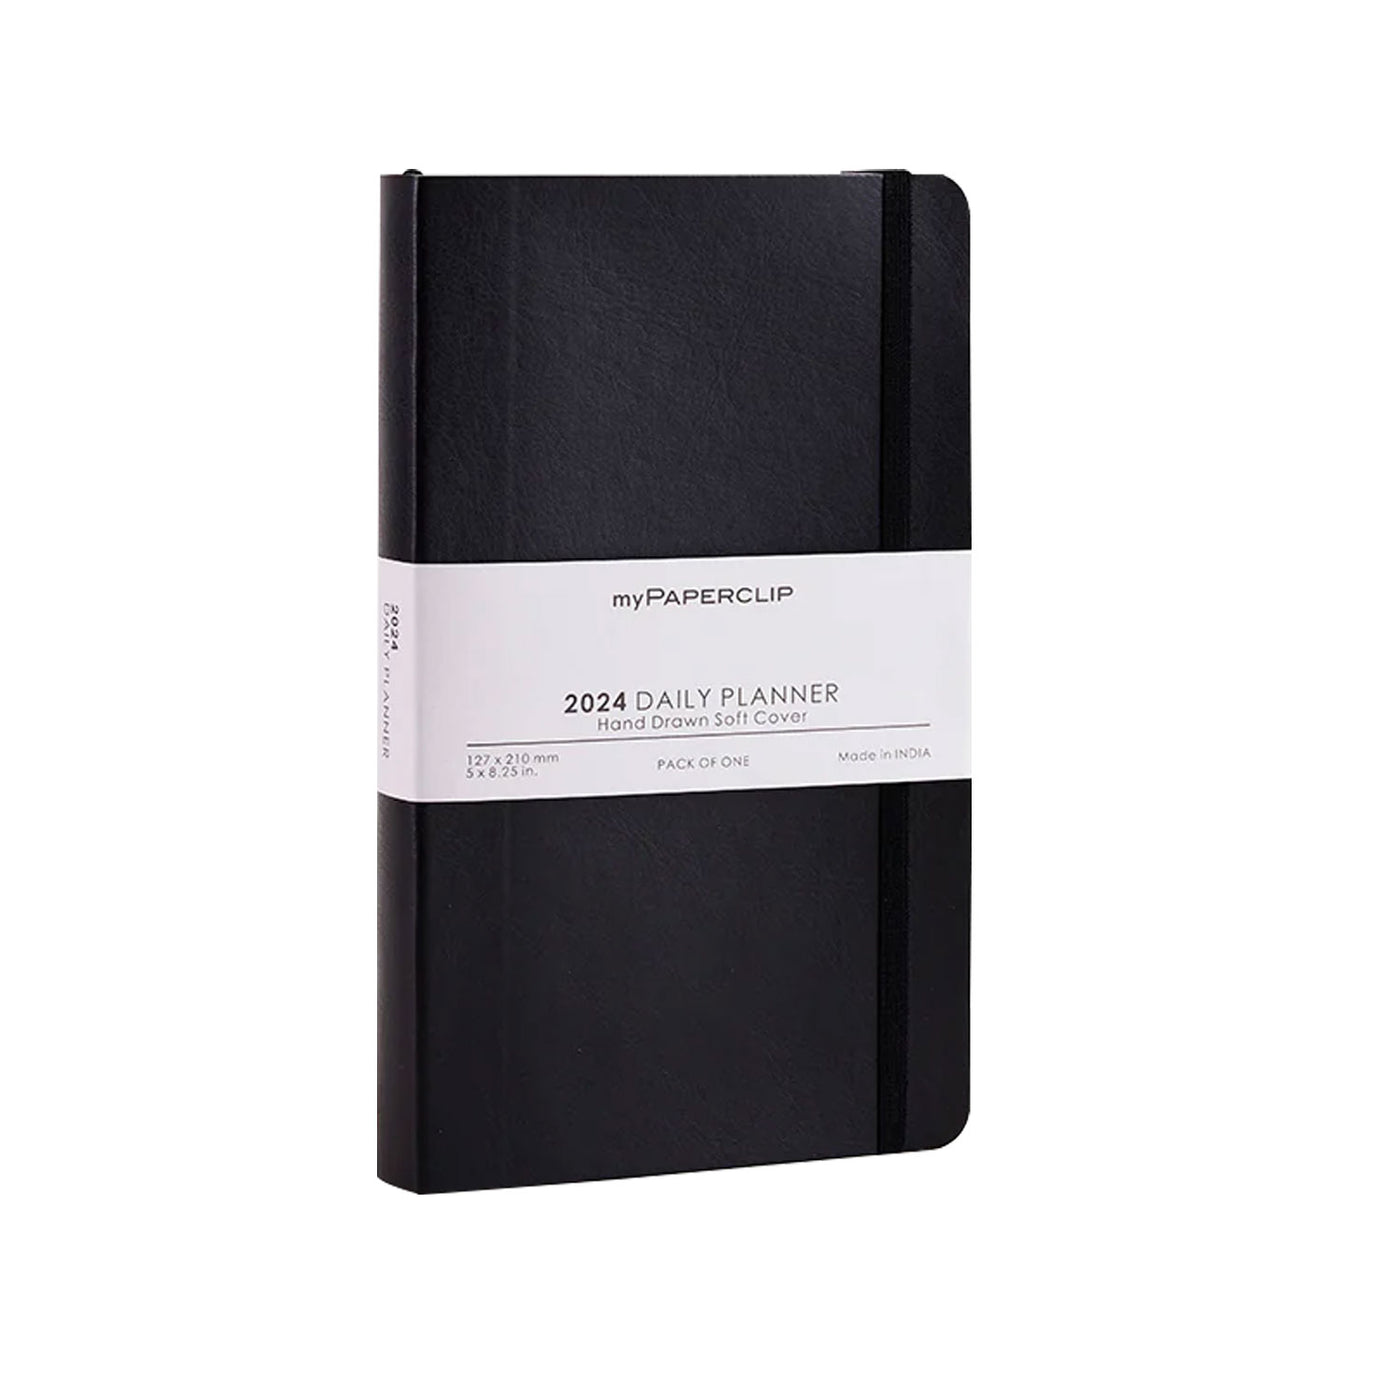 myPAPERCLIP M2 2024 Daily Planner - Black 1